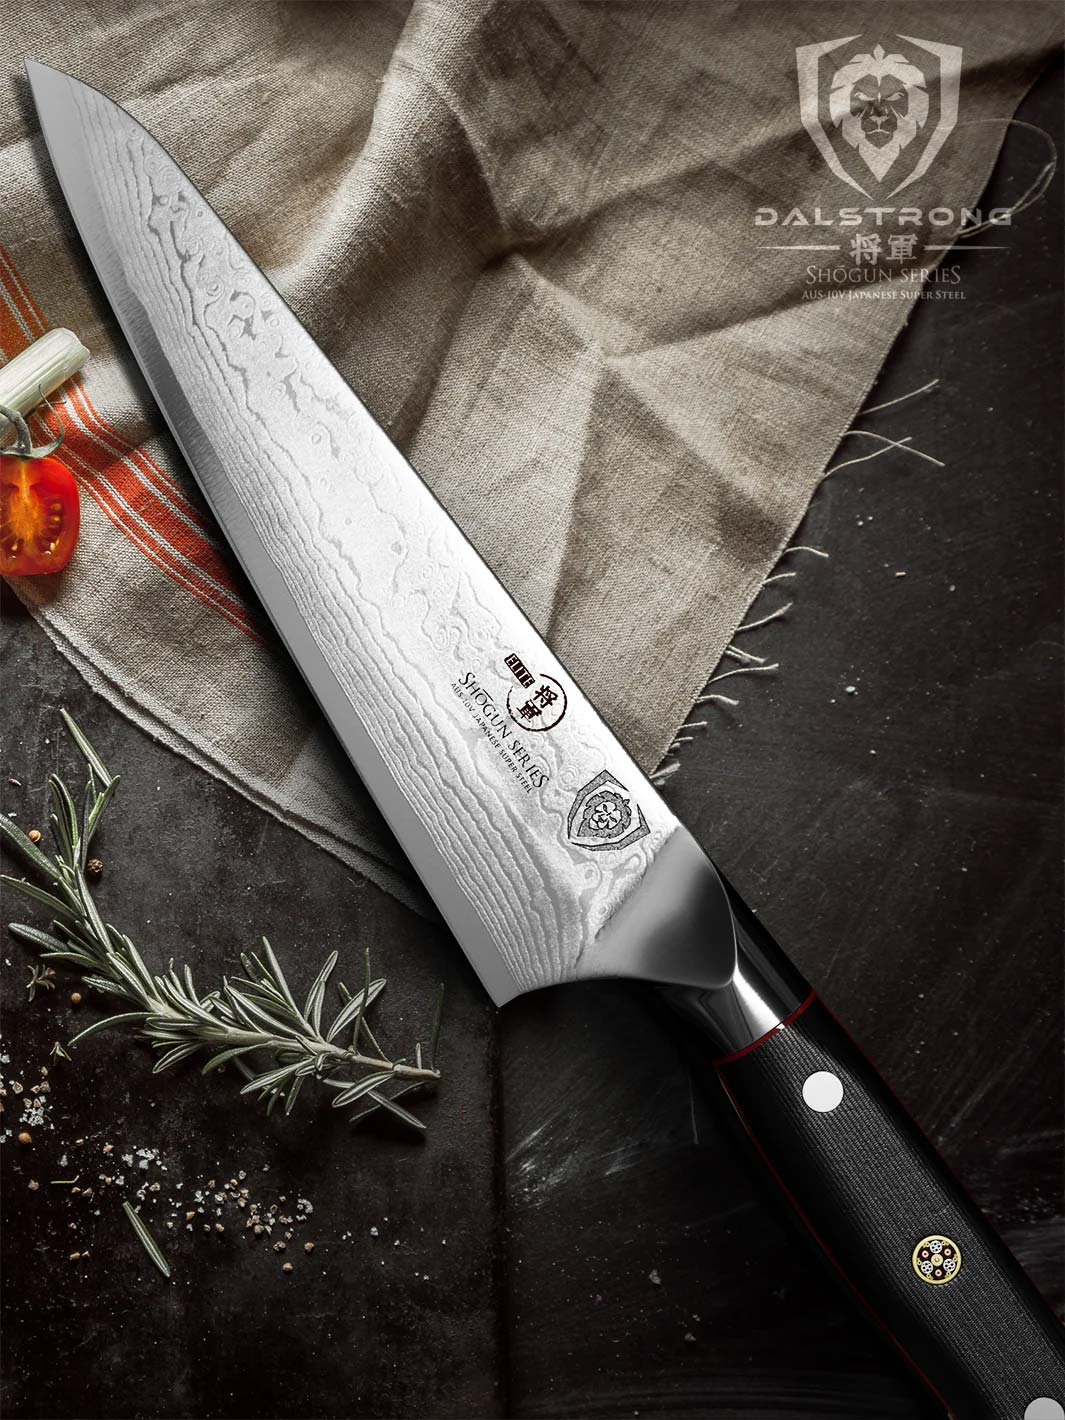 Dalstrong shogun series 7 inch chef knife with black handle on top of a white cloth.